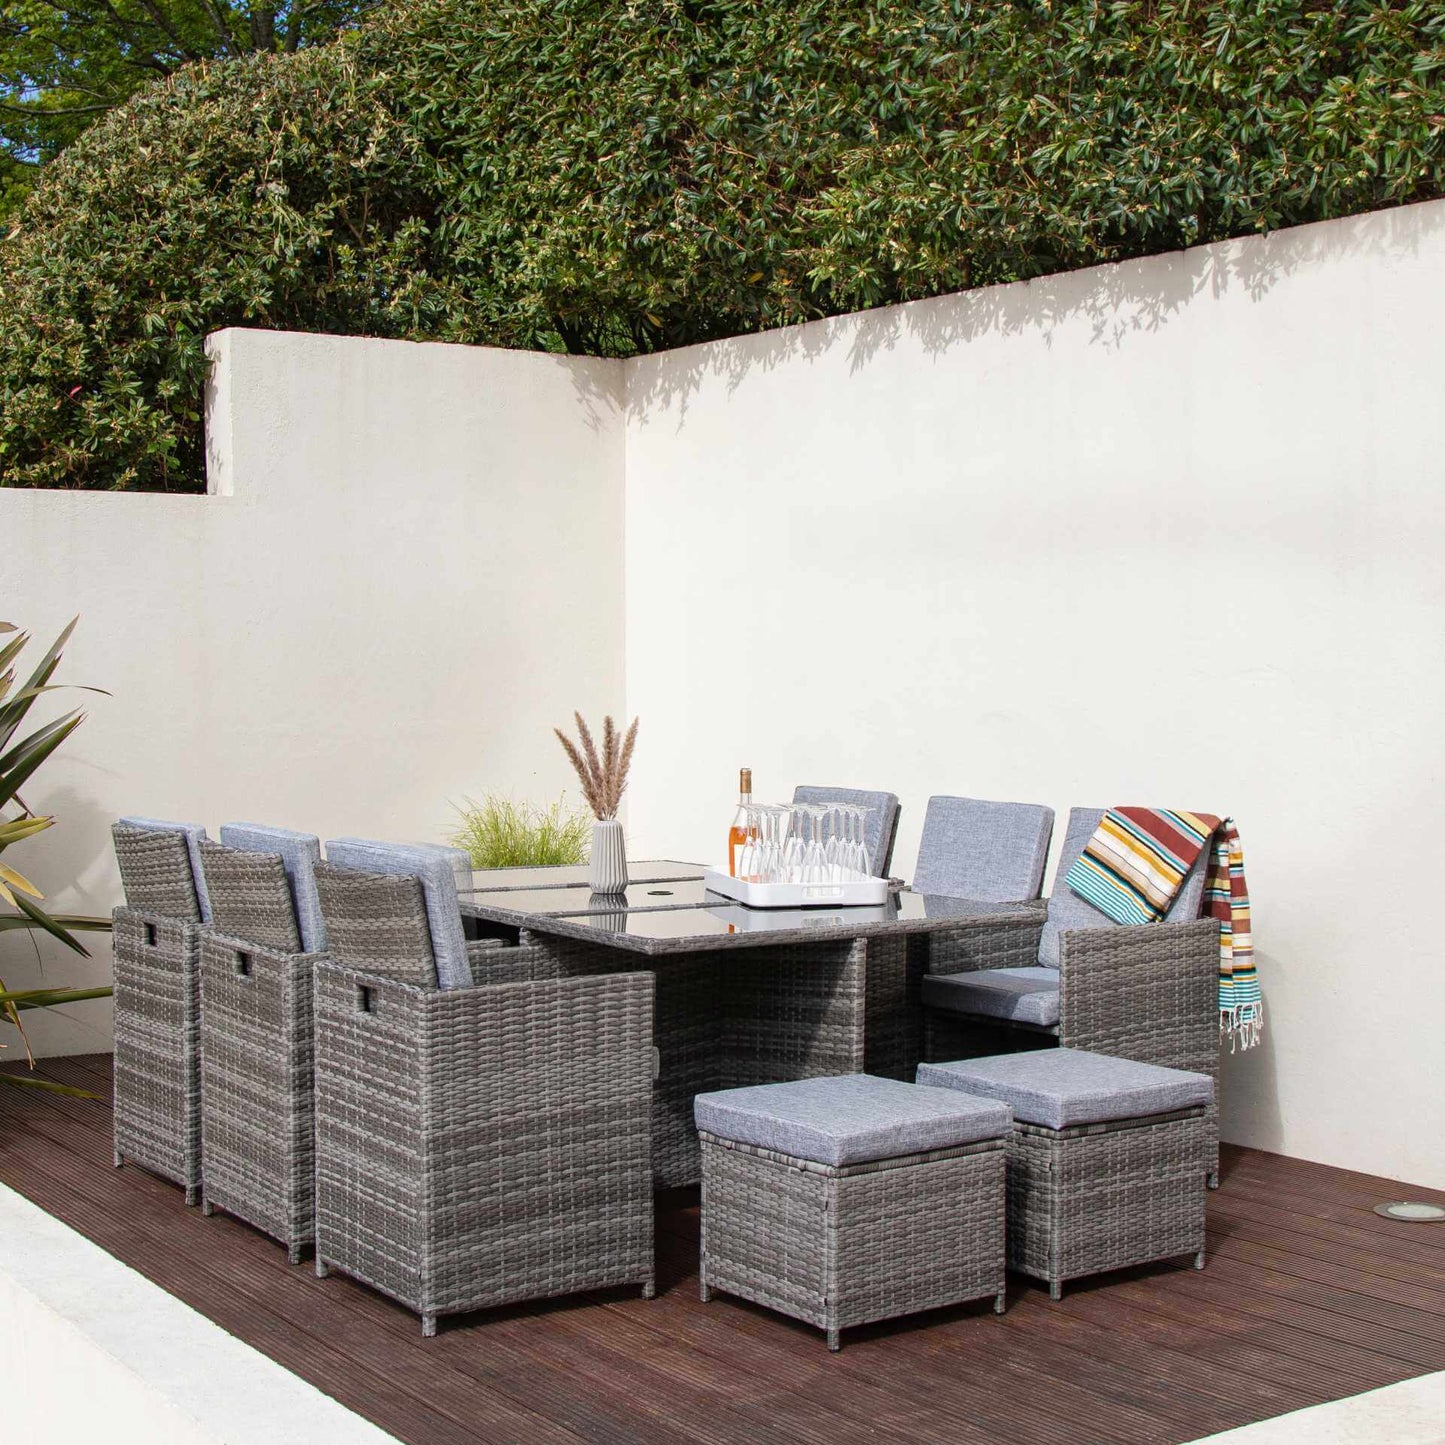 10 Seater Rattan Cube Garden Dining Set With Parasol - Grey Weave - Laura James